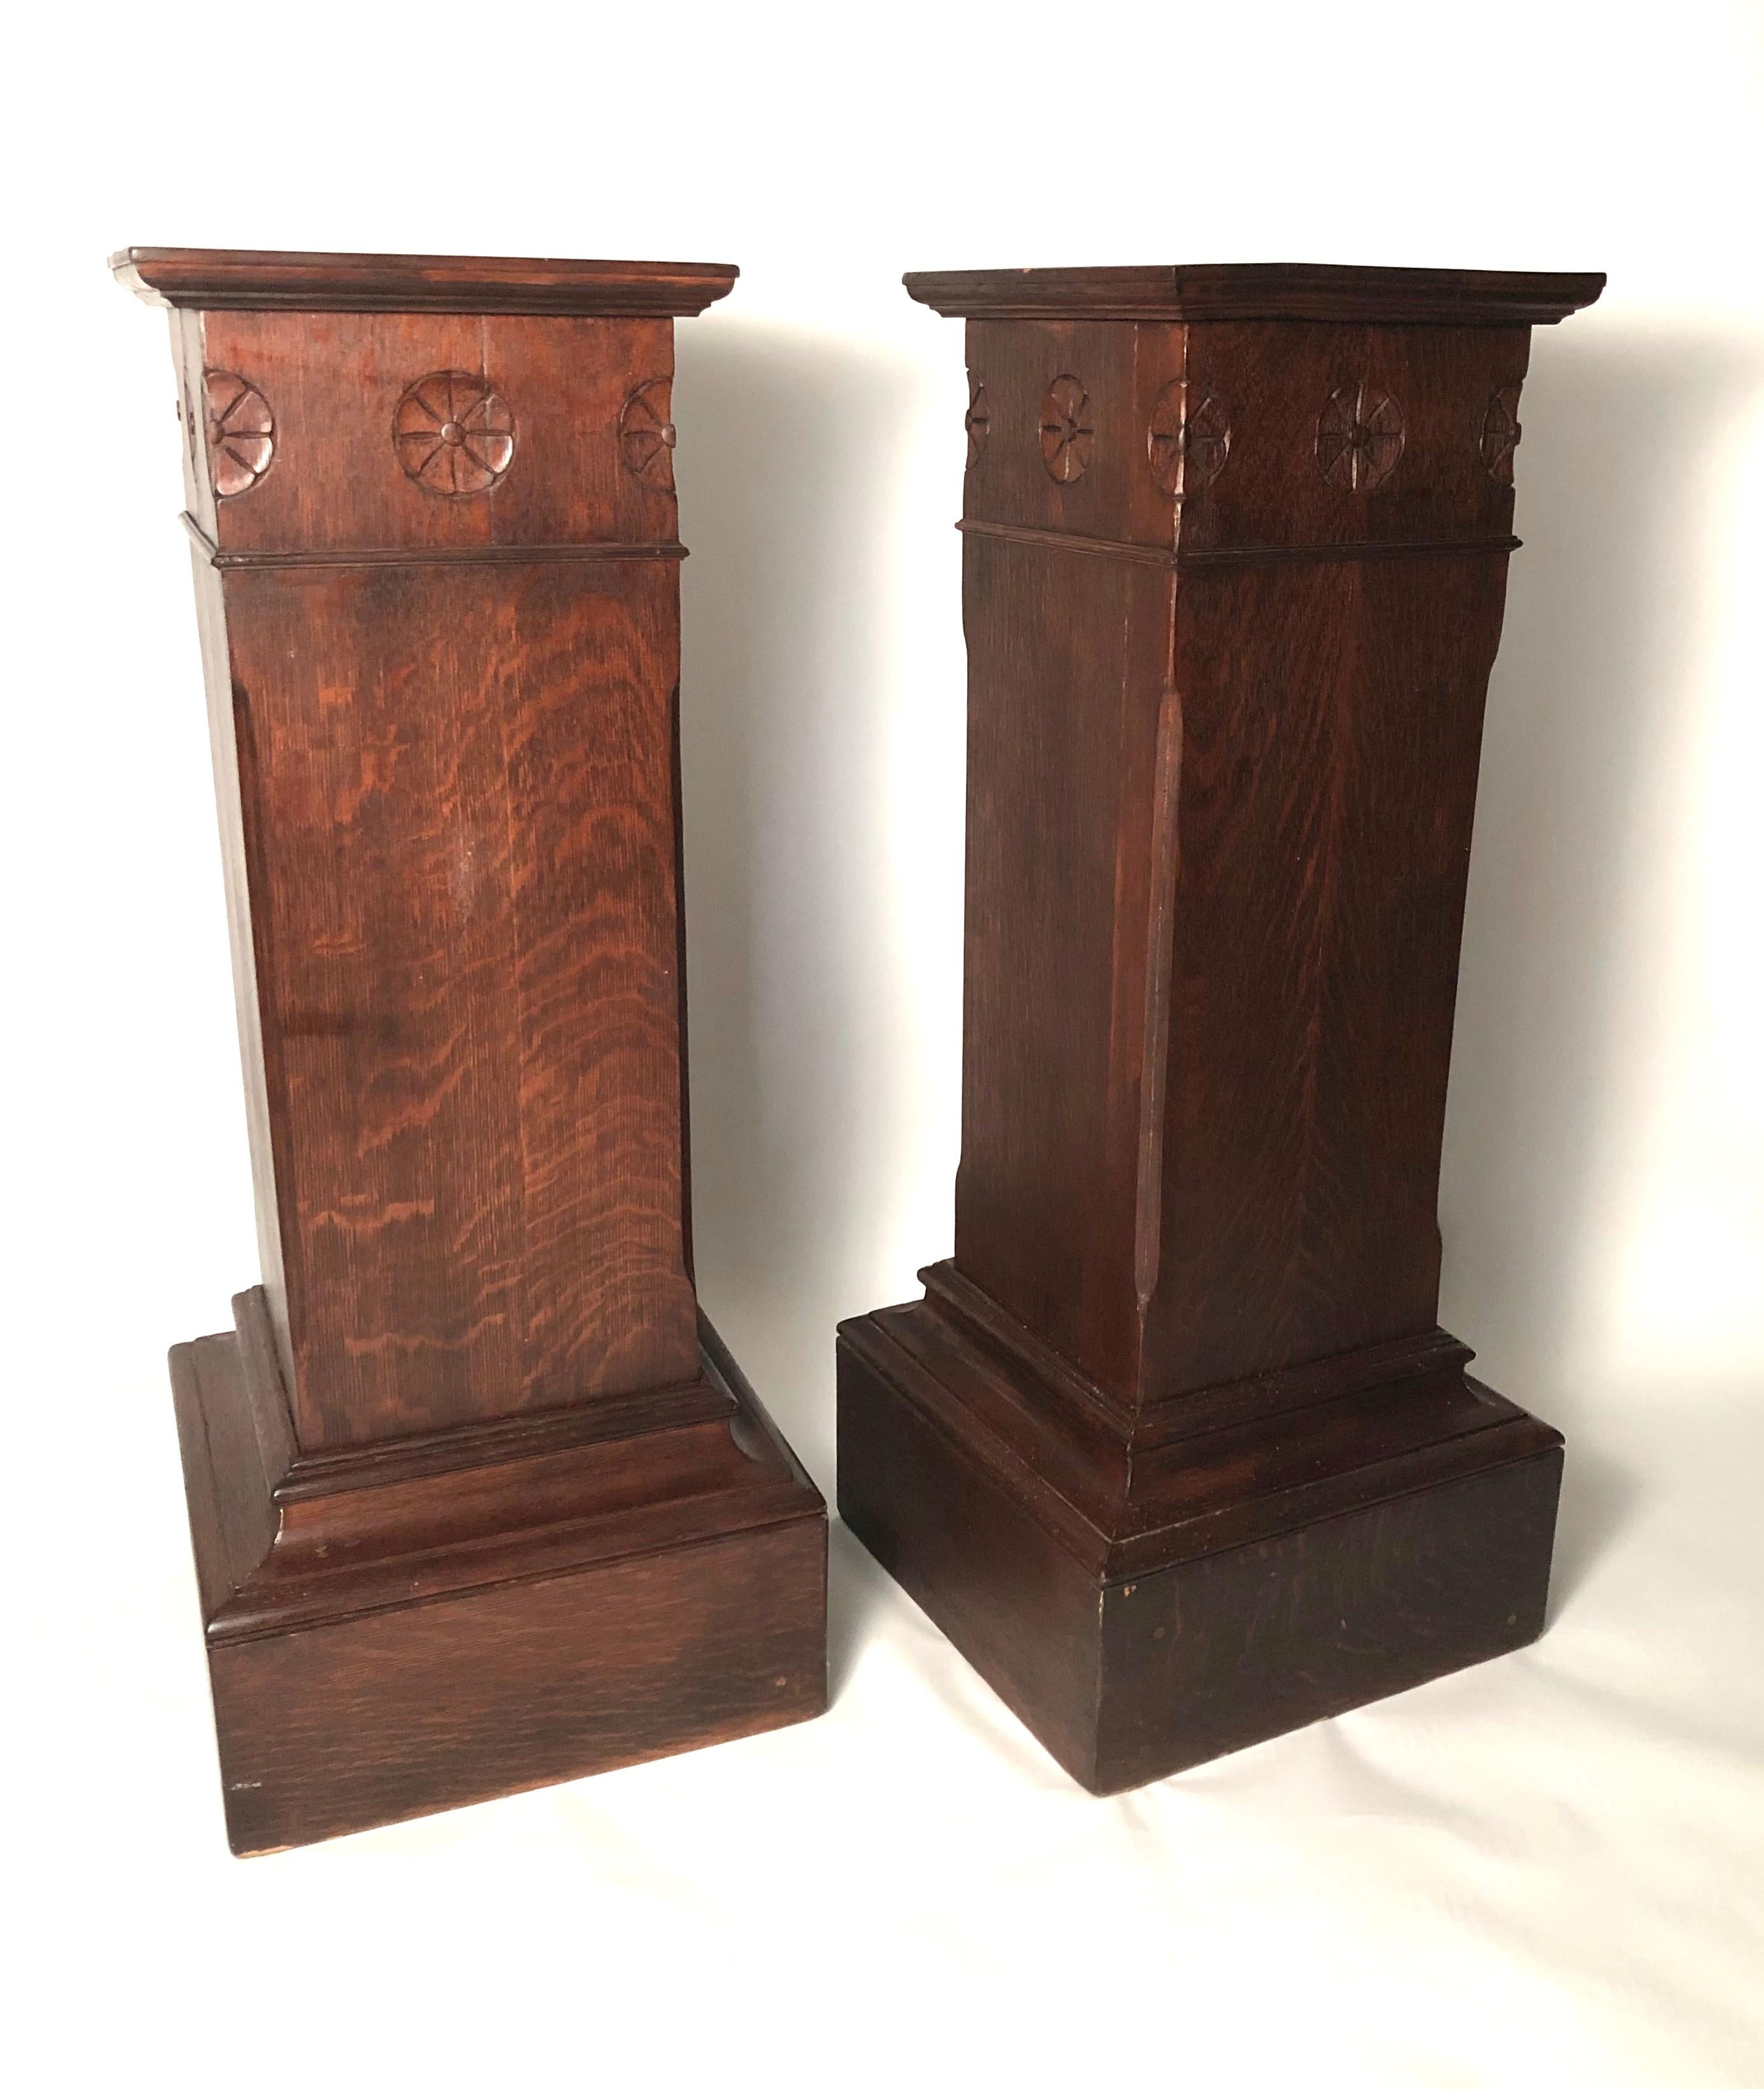 A pair of substantial and beautifully made Arts & Crafts period pedestals in quarter-sawn oak, with carved rosettes at the corners and stepped molding at the top and bottom of each.

Measures: Height 48 inches
Width 20 inches square at bases, 16